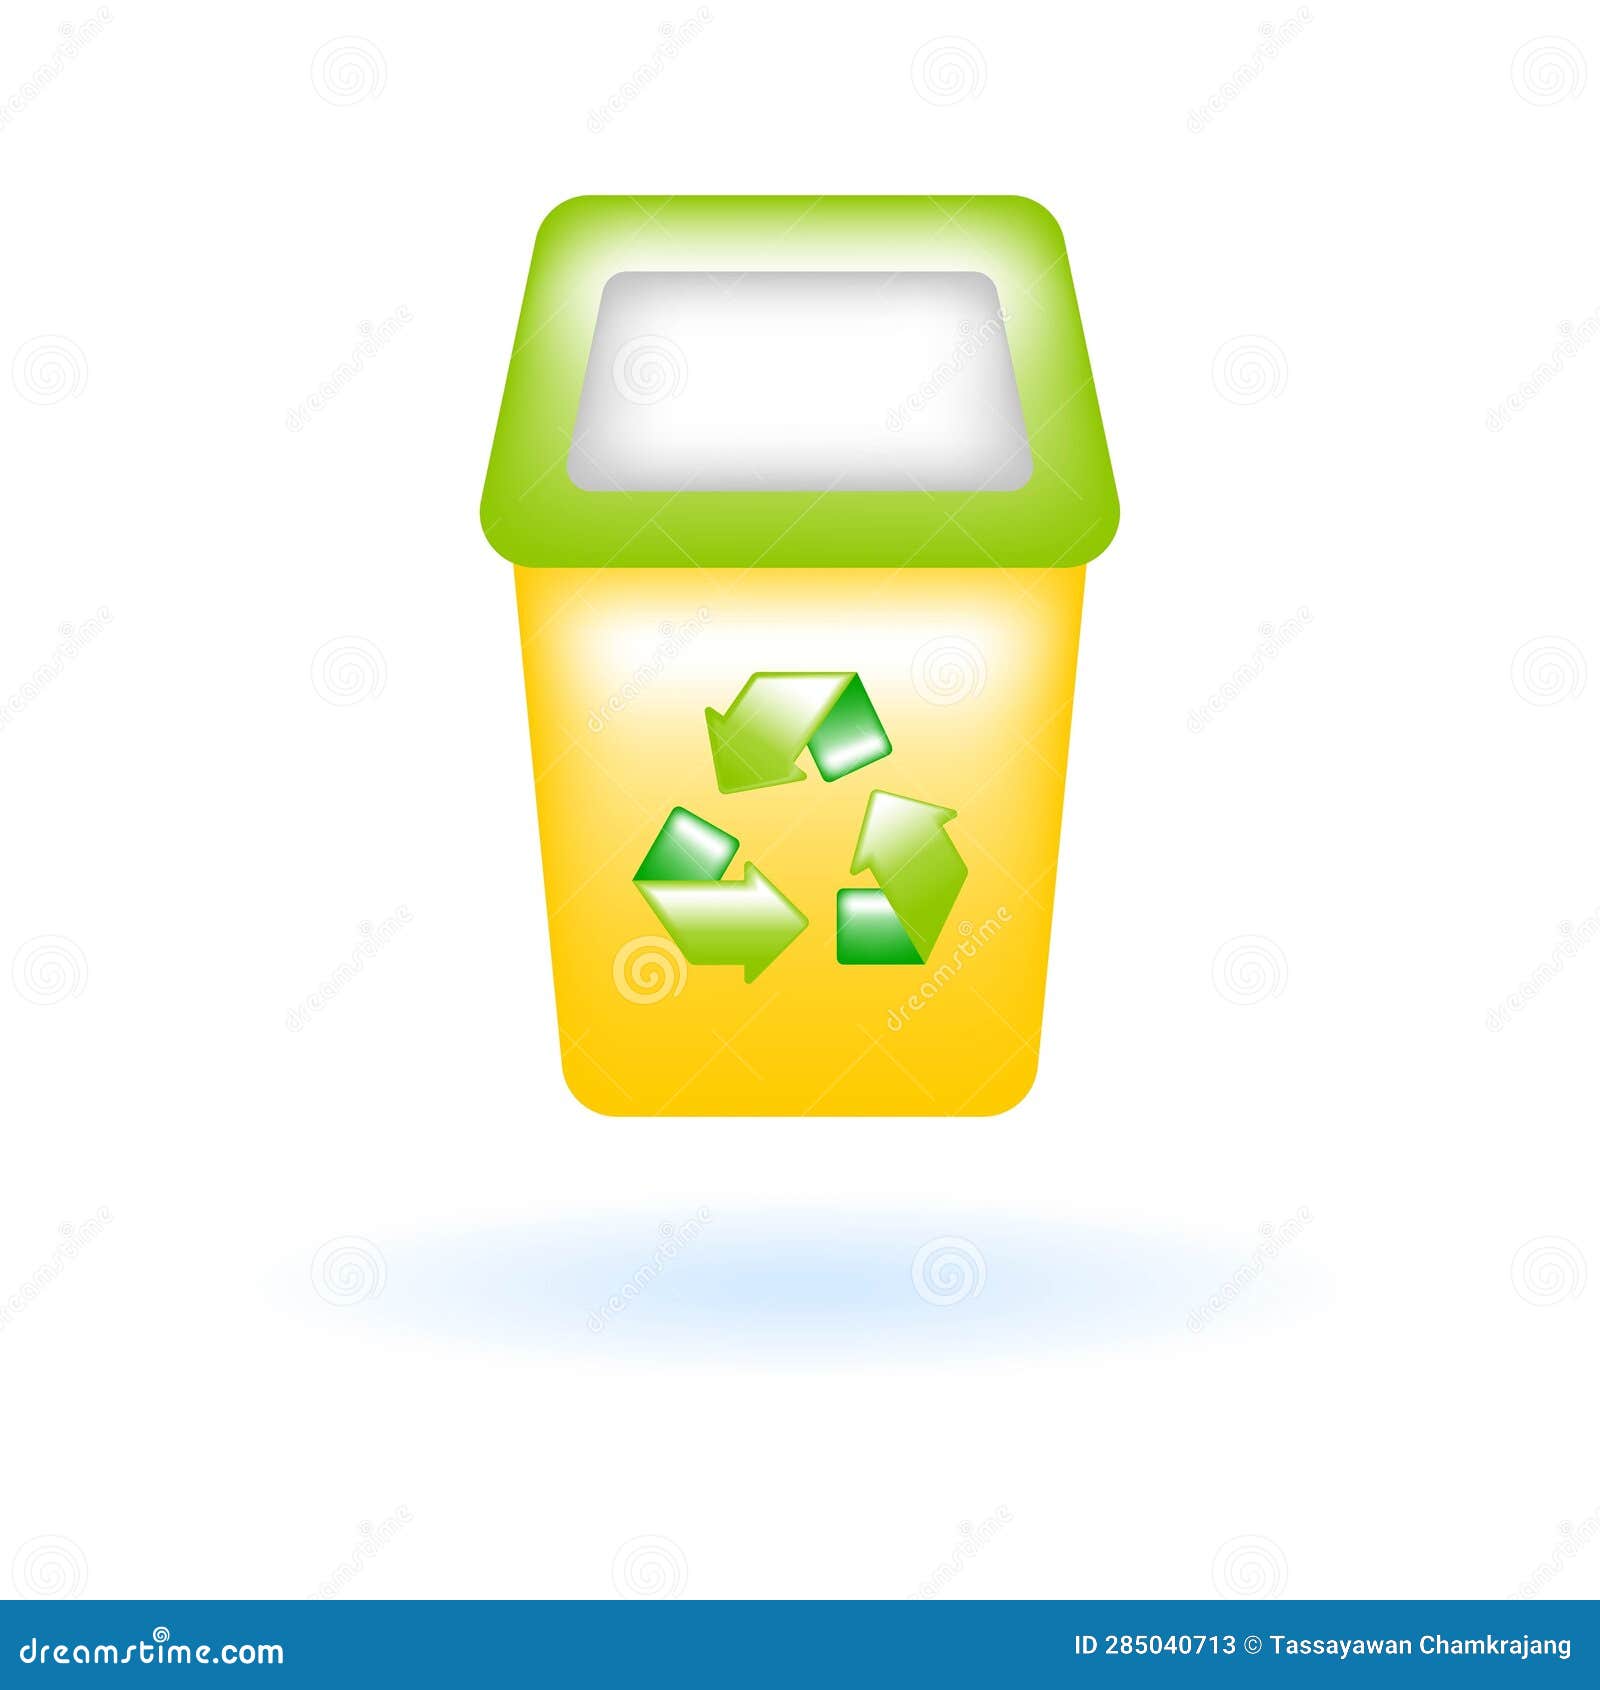 https://thumbs.dreamstime.com/z/d-recycle-bin-trash-can-garbage-icon-eco-sustainability-environment-concept-glossy-glass-plastic-color-cute-realistic-cartoon-285040713.jpg